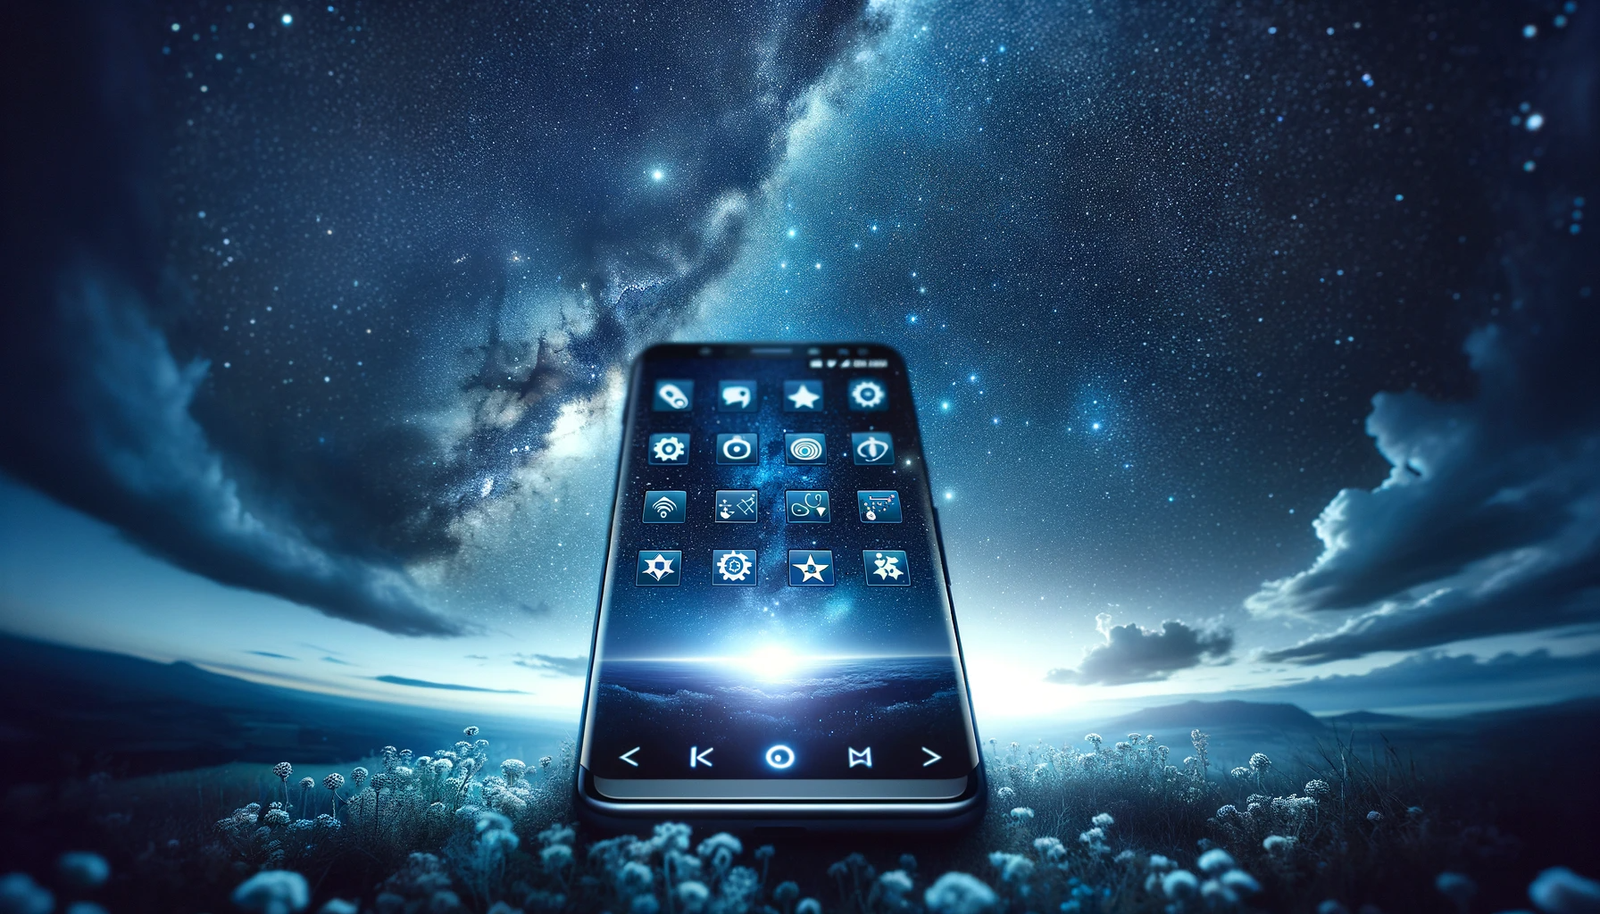 Top 10 Android Apps for Night Sky Photography